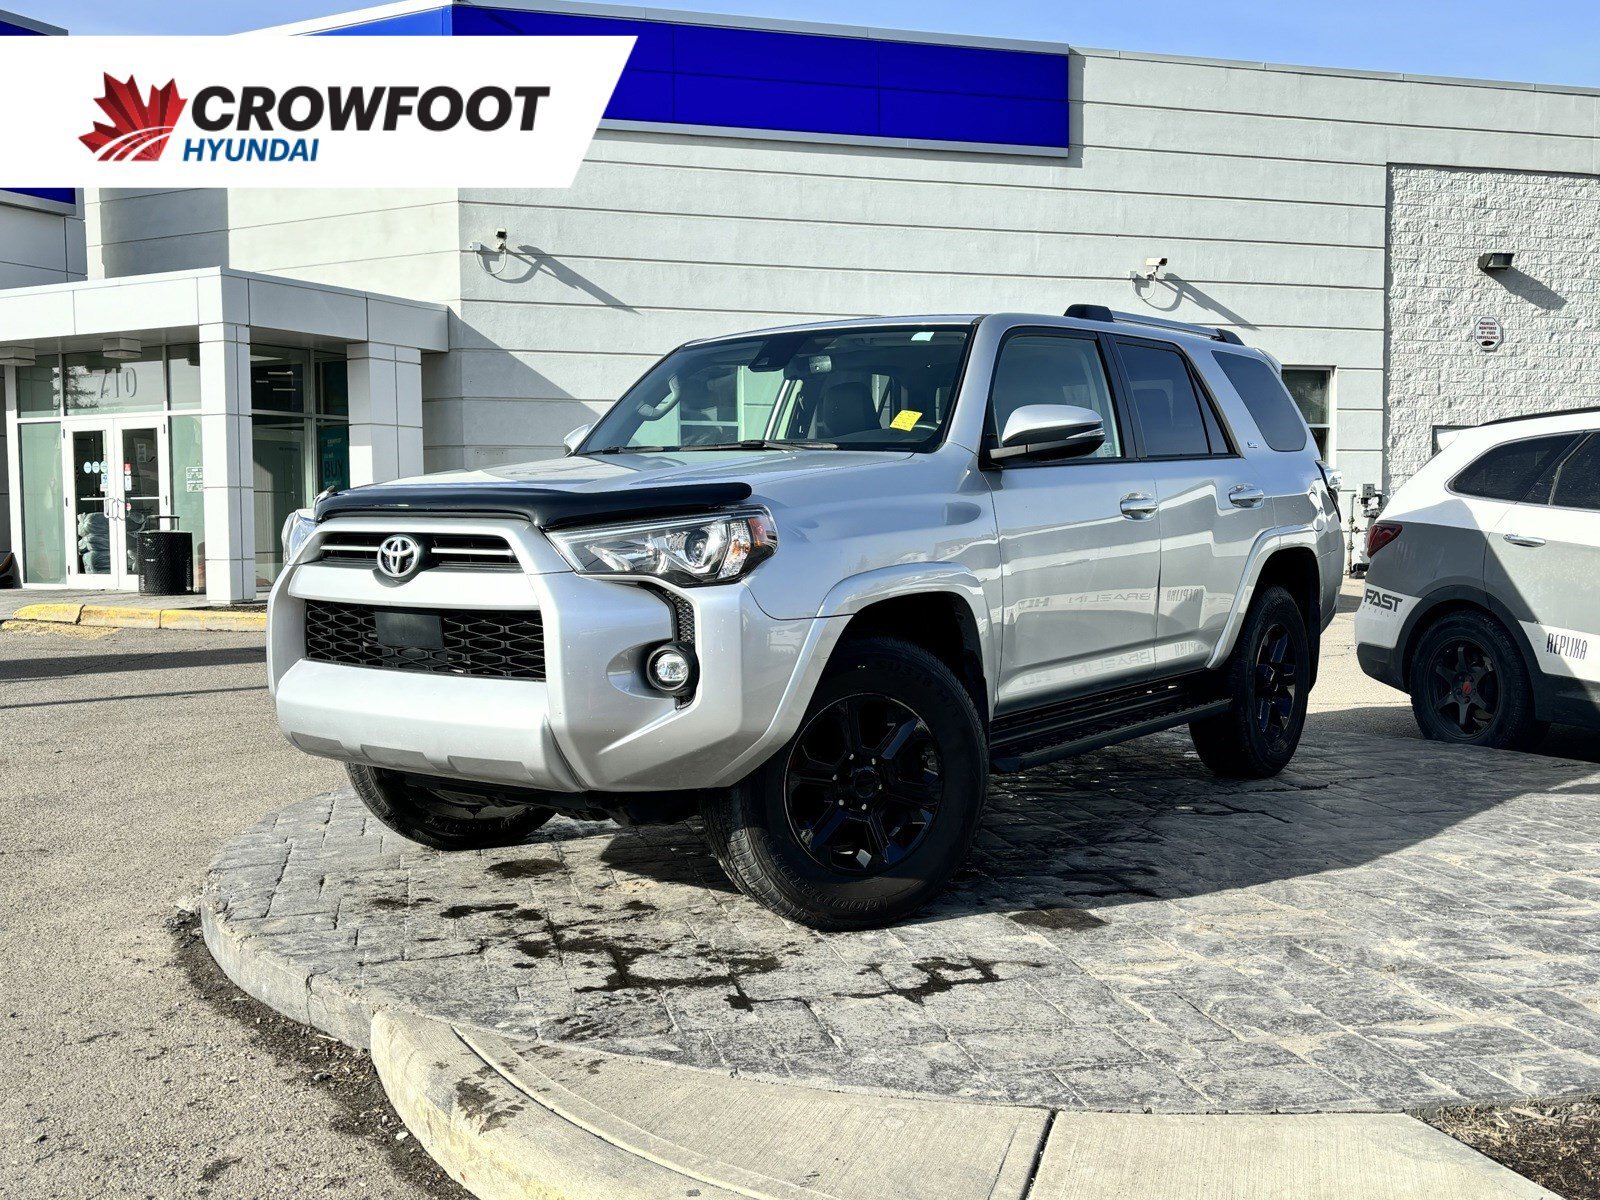 2021 Toyota 4Runner - 4WD, No Accidents, 3rd Row, Black Rims, Remote S